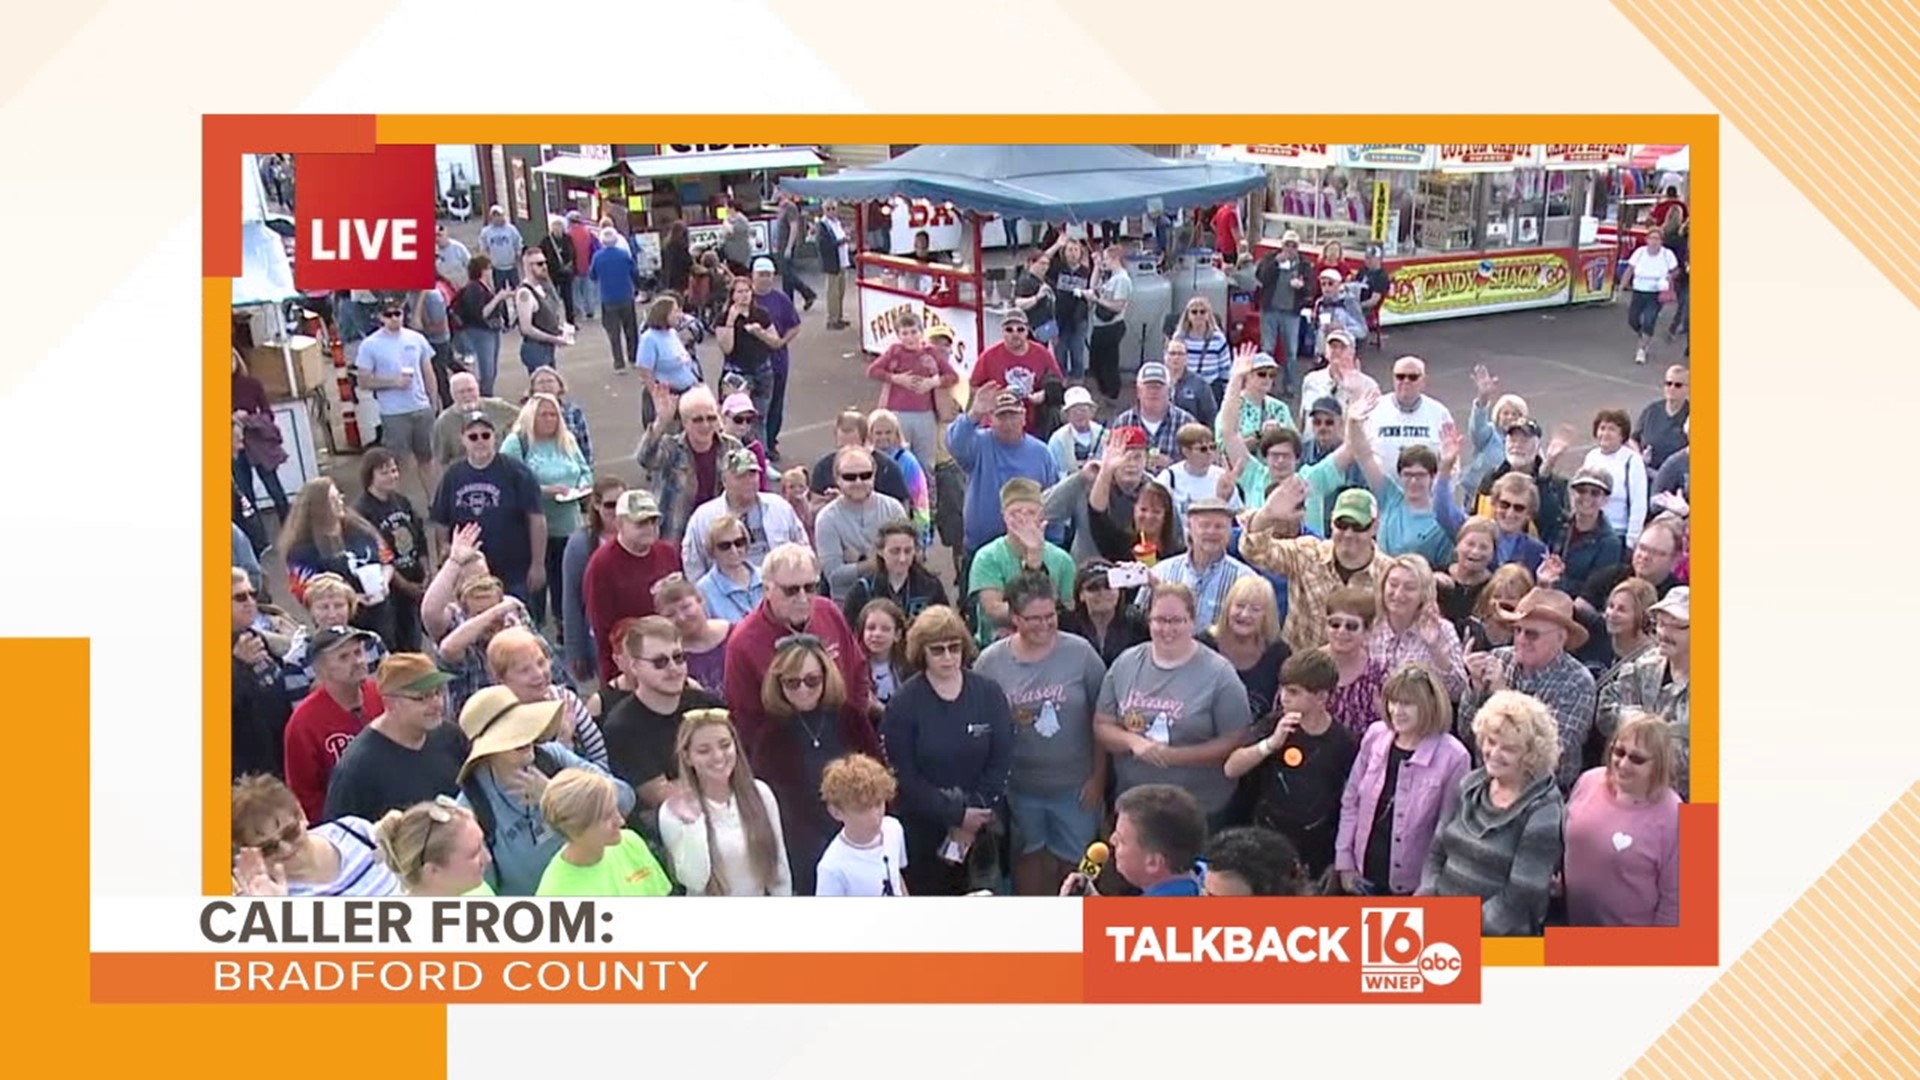 Callers are commenting on everything Bloomsburg Fair related in this Talkback 16.